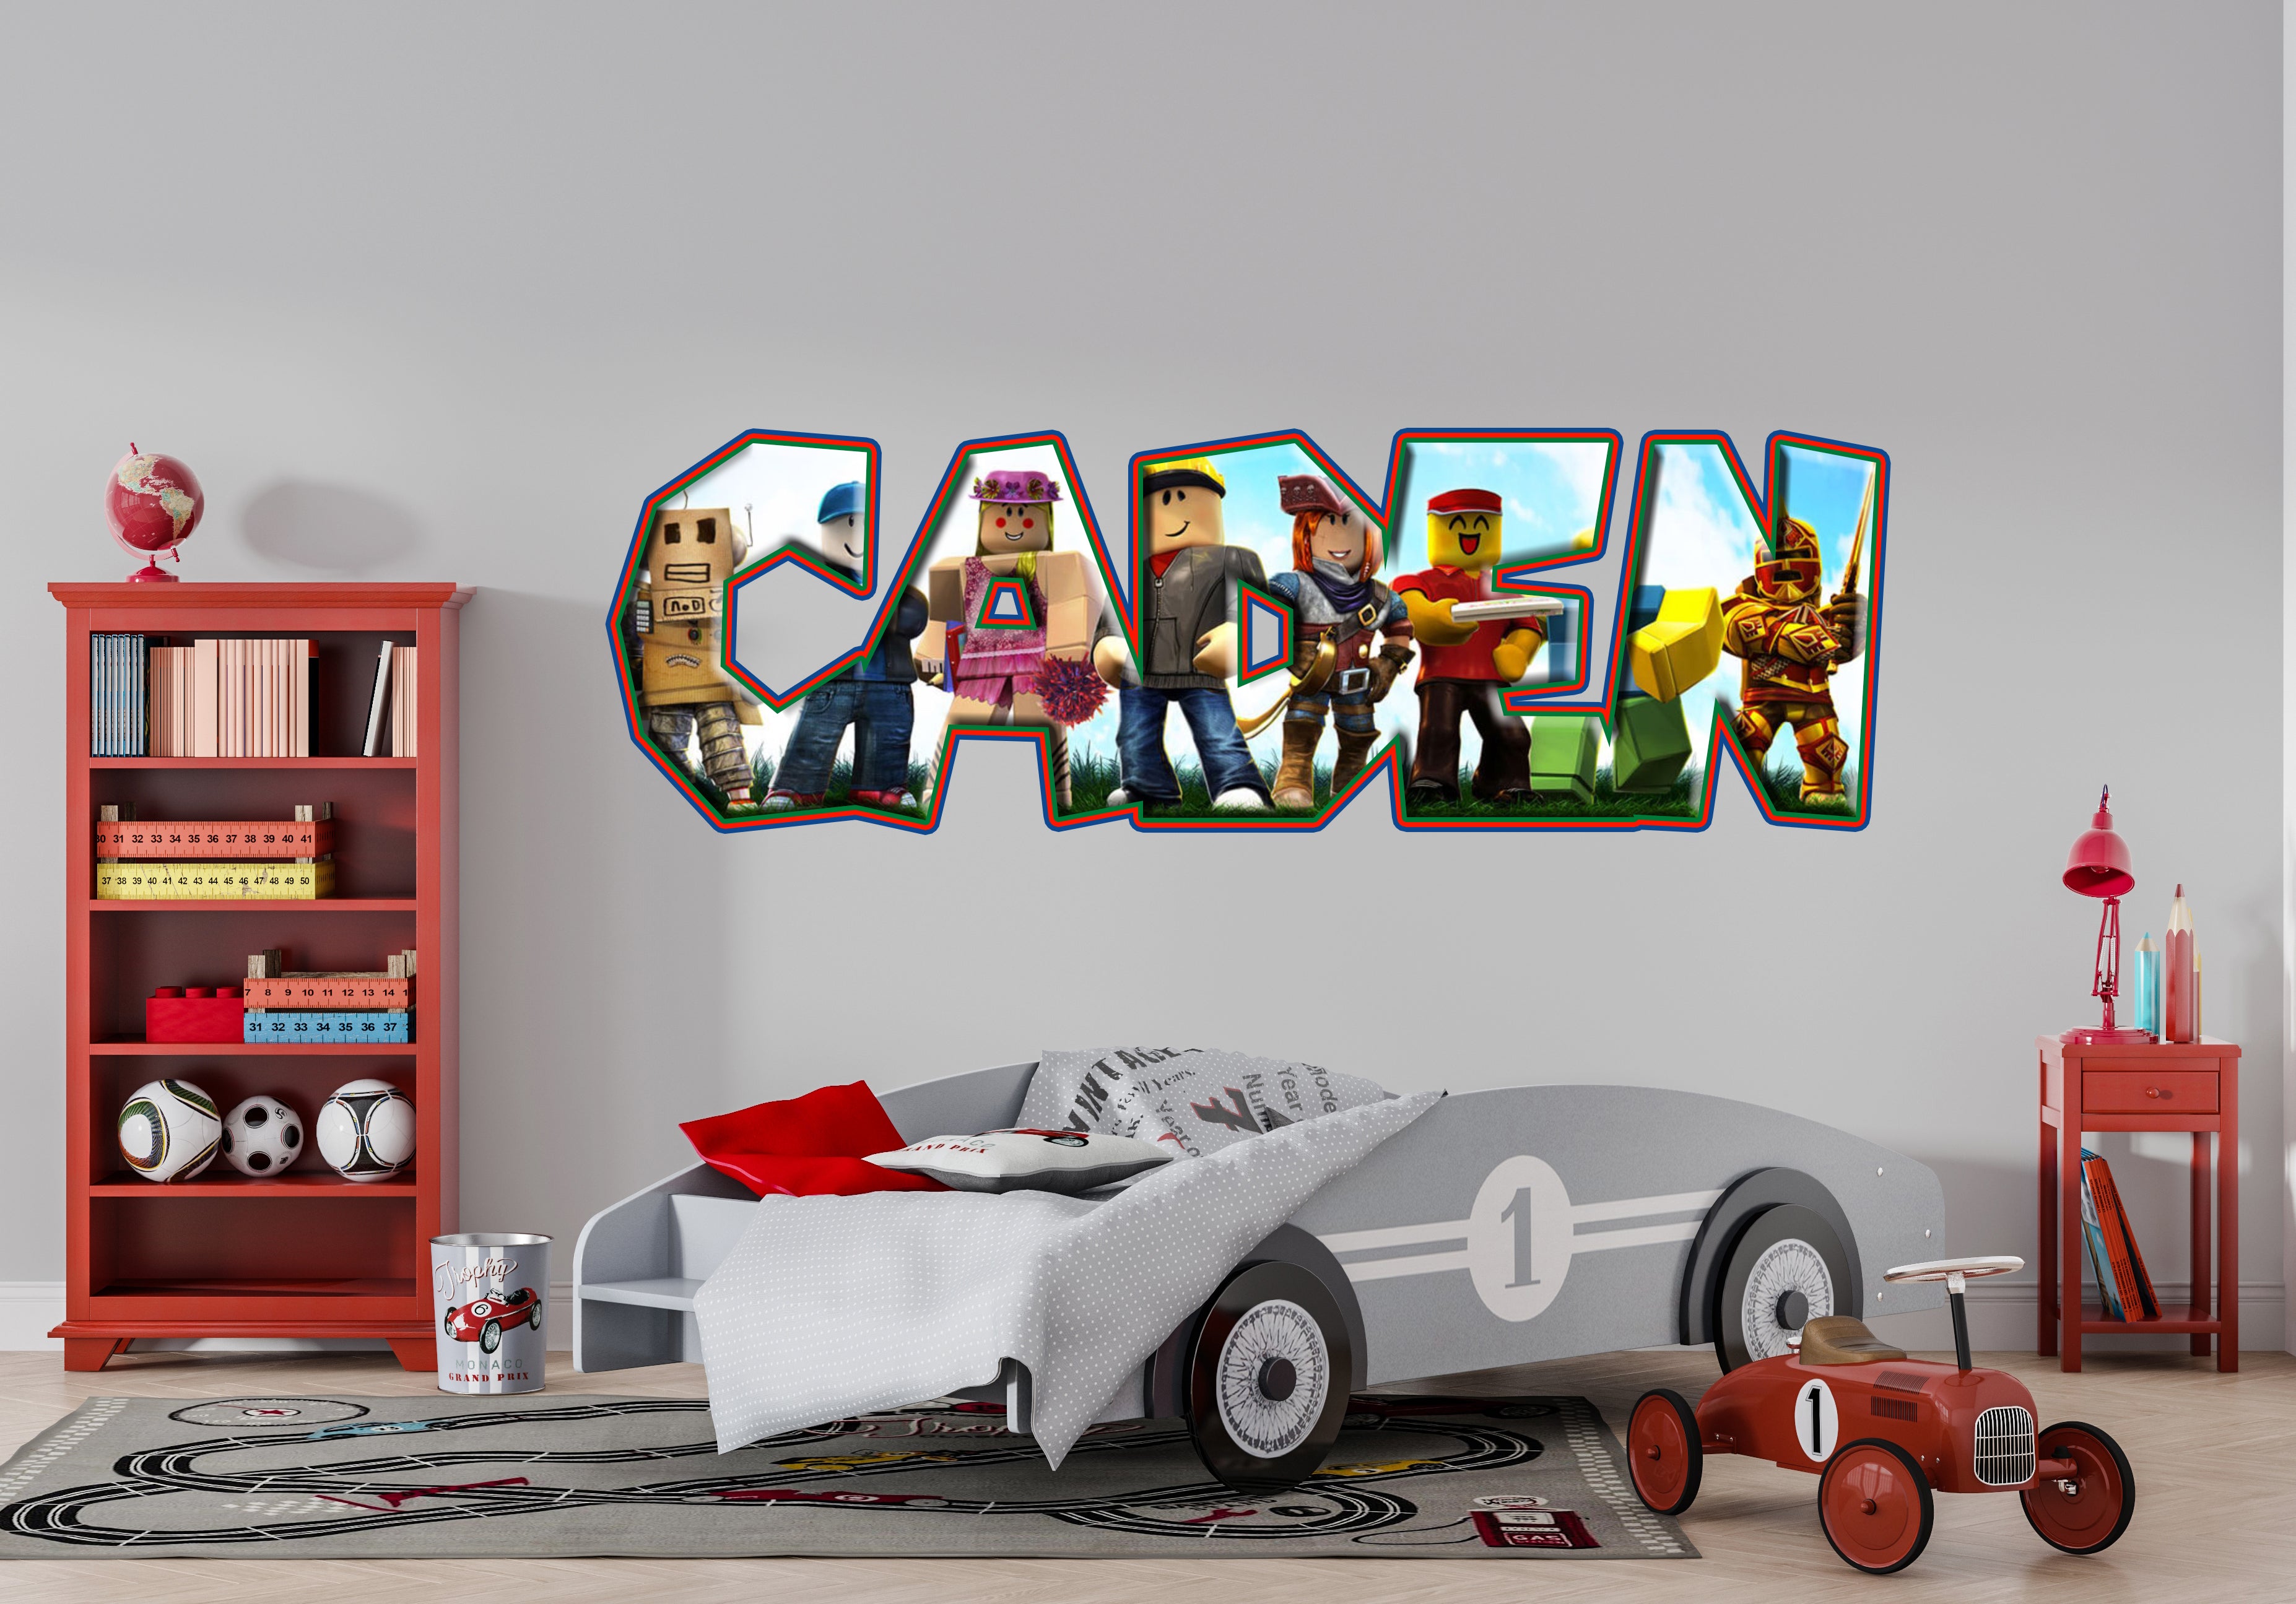 Game R-Roblox Cool one Poster Prints Wall Sticker Painting Bedroom